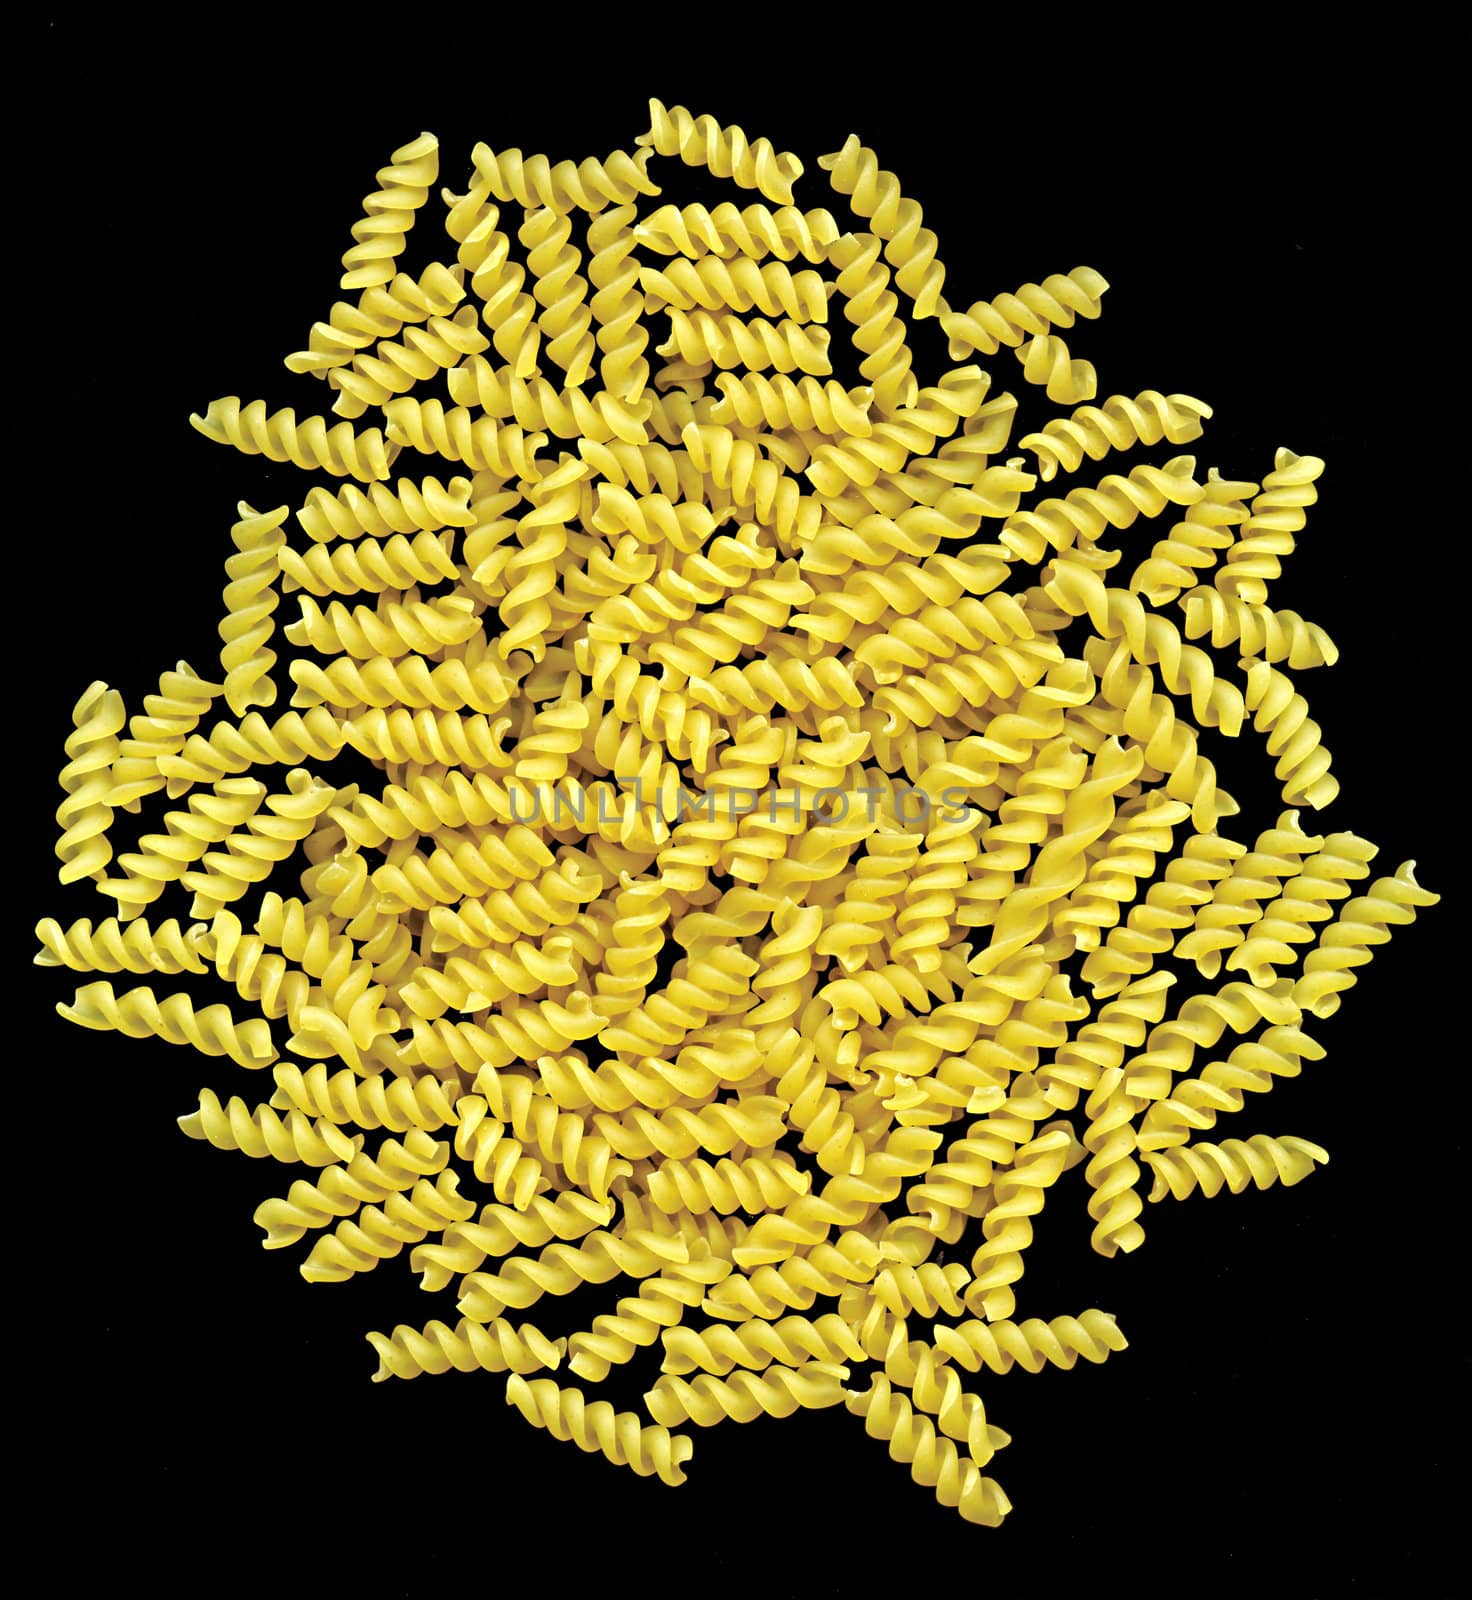 A heap of rotini pasta on black background